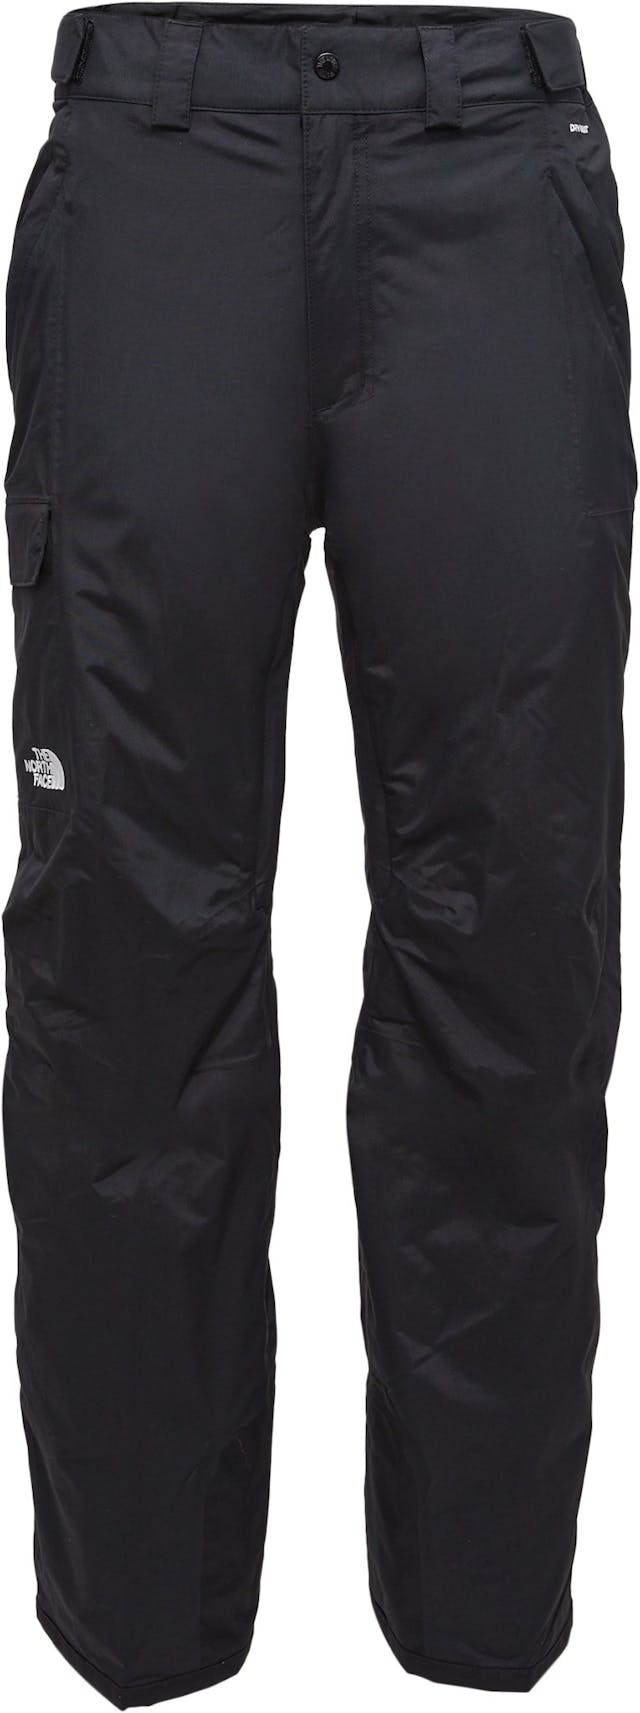 Product image for Freedom Insulated Pants - Men's